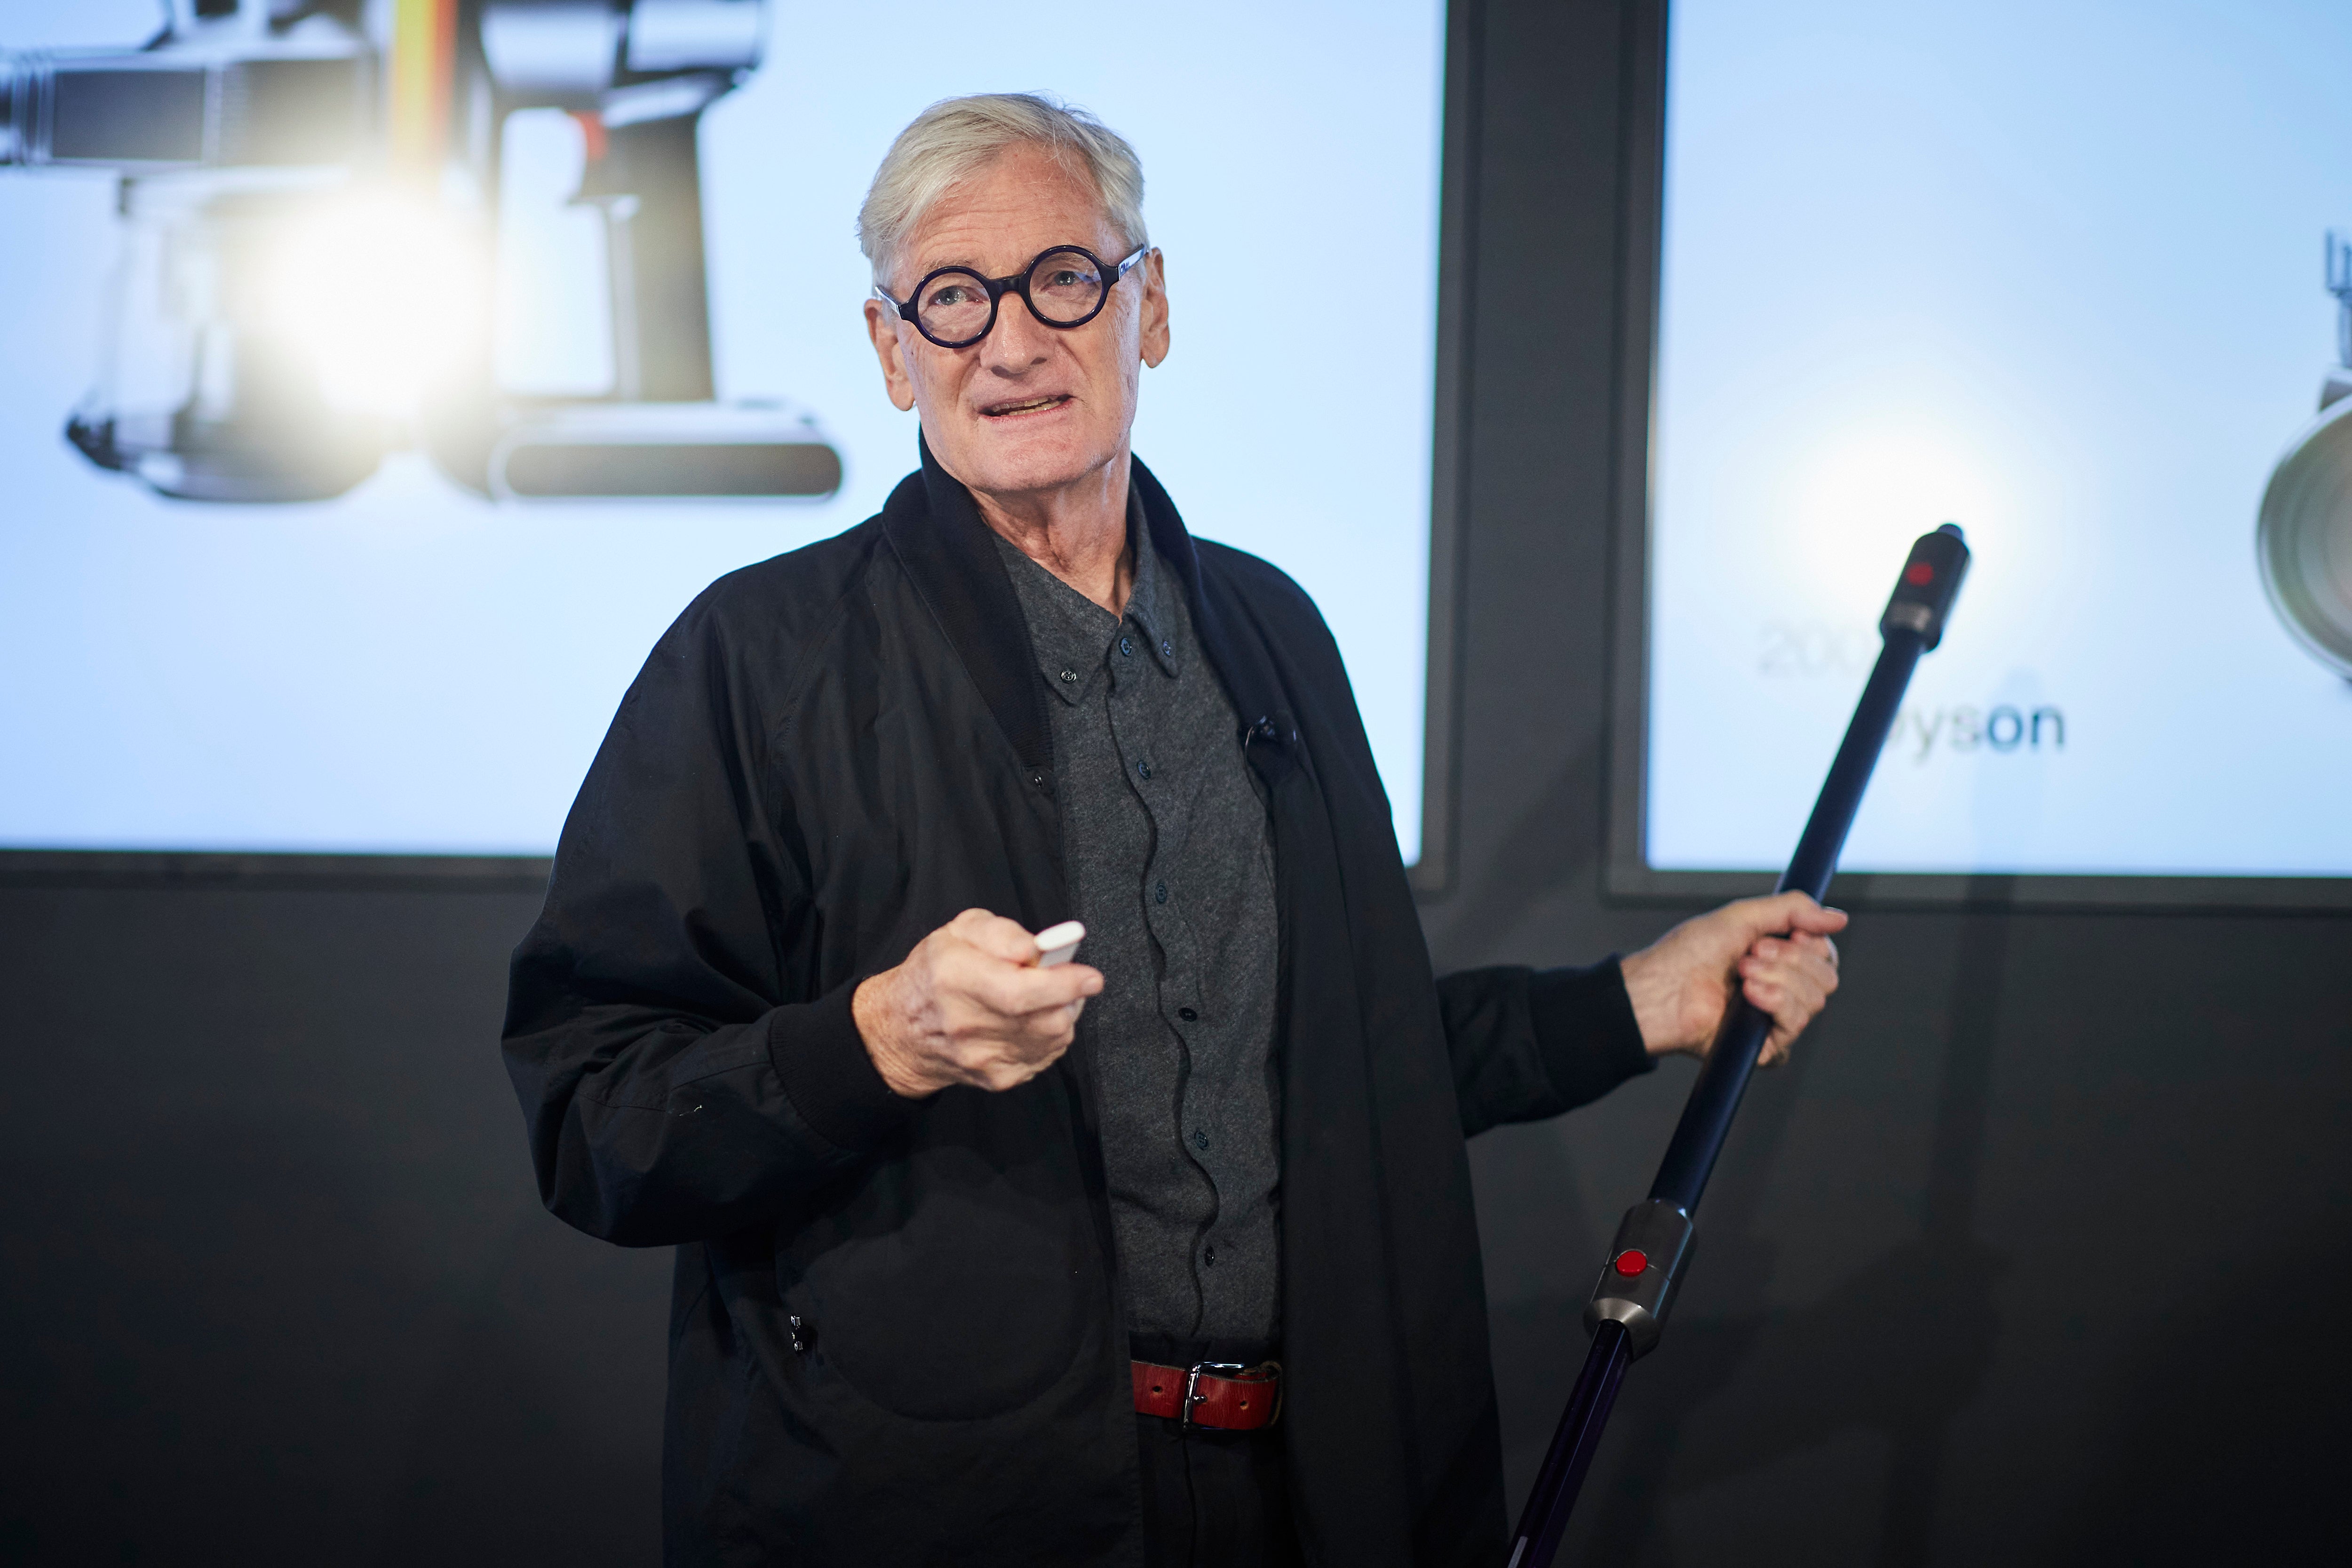 James Dyson founded the company in 1991